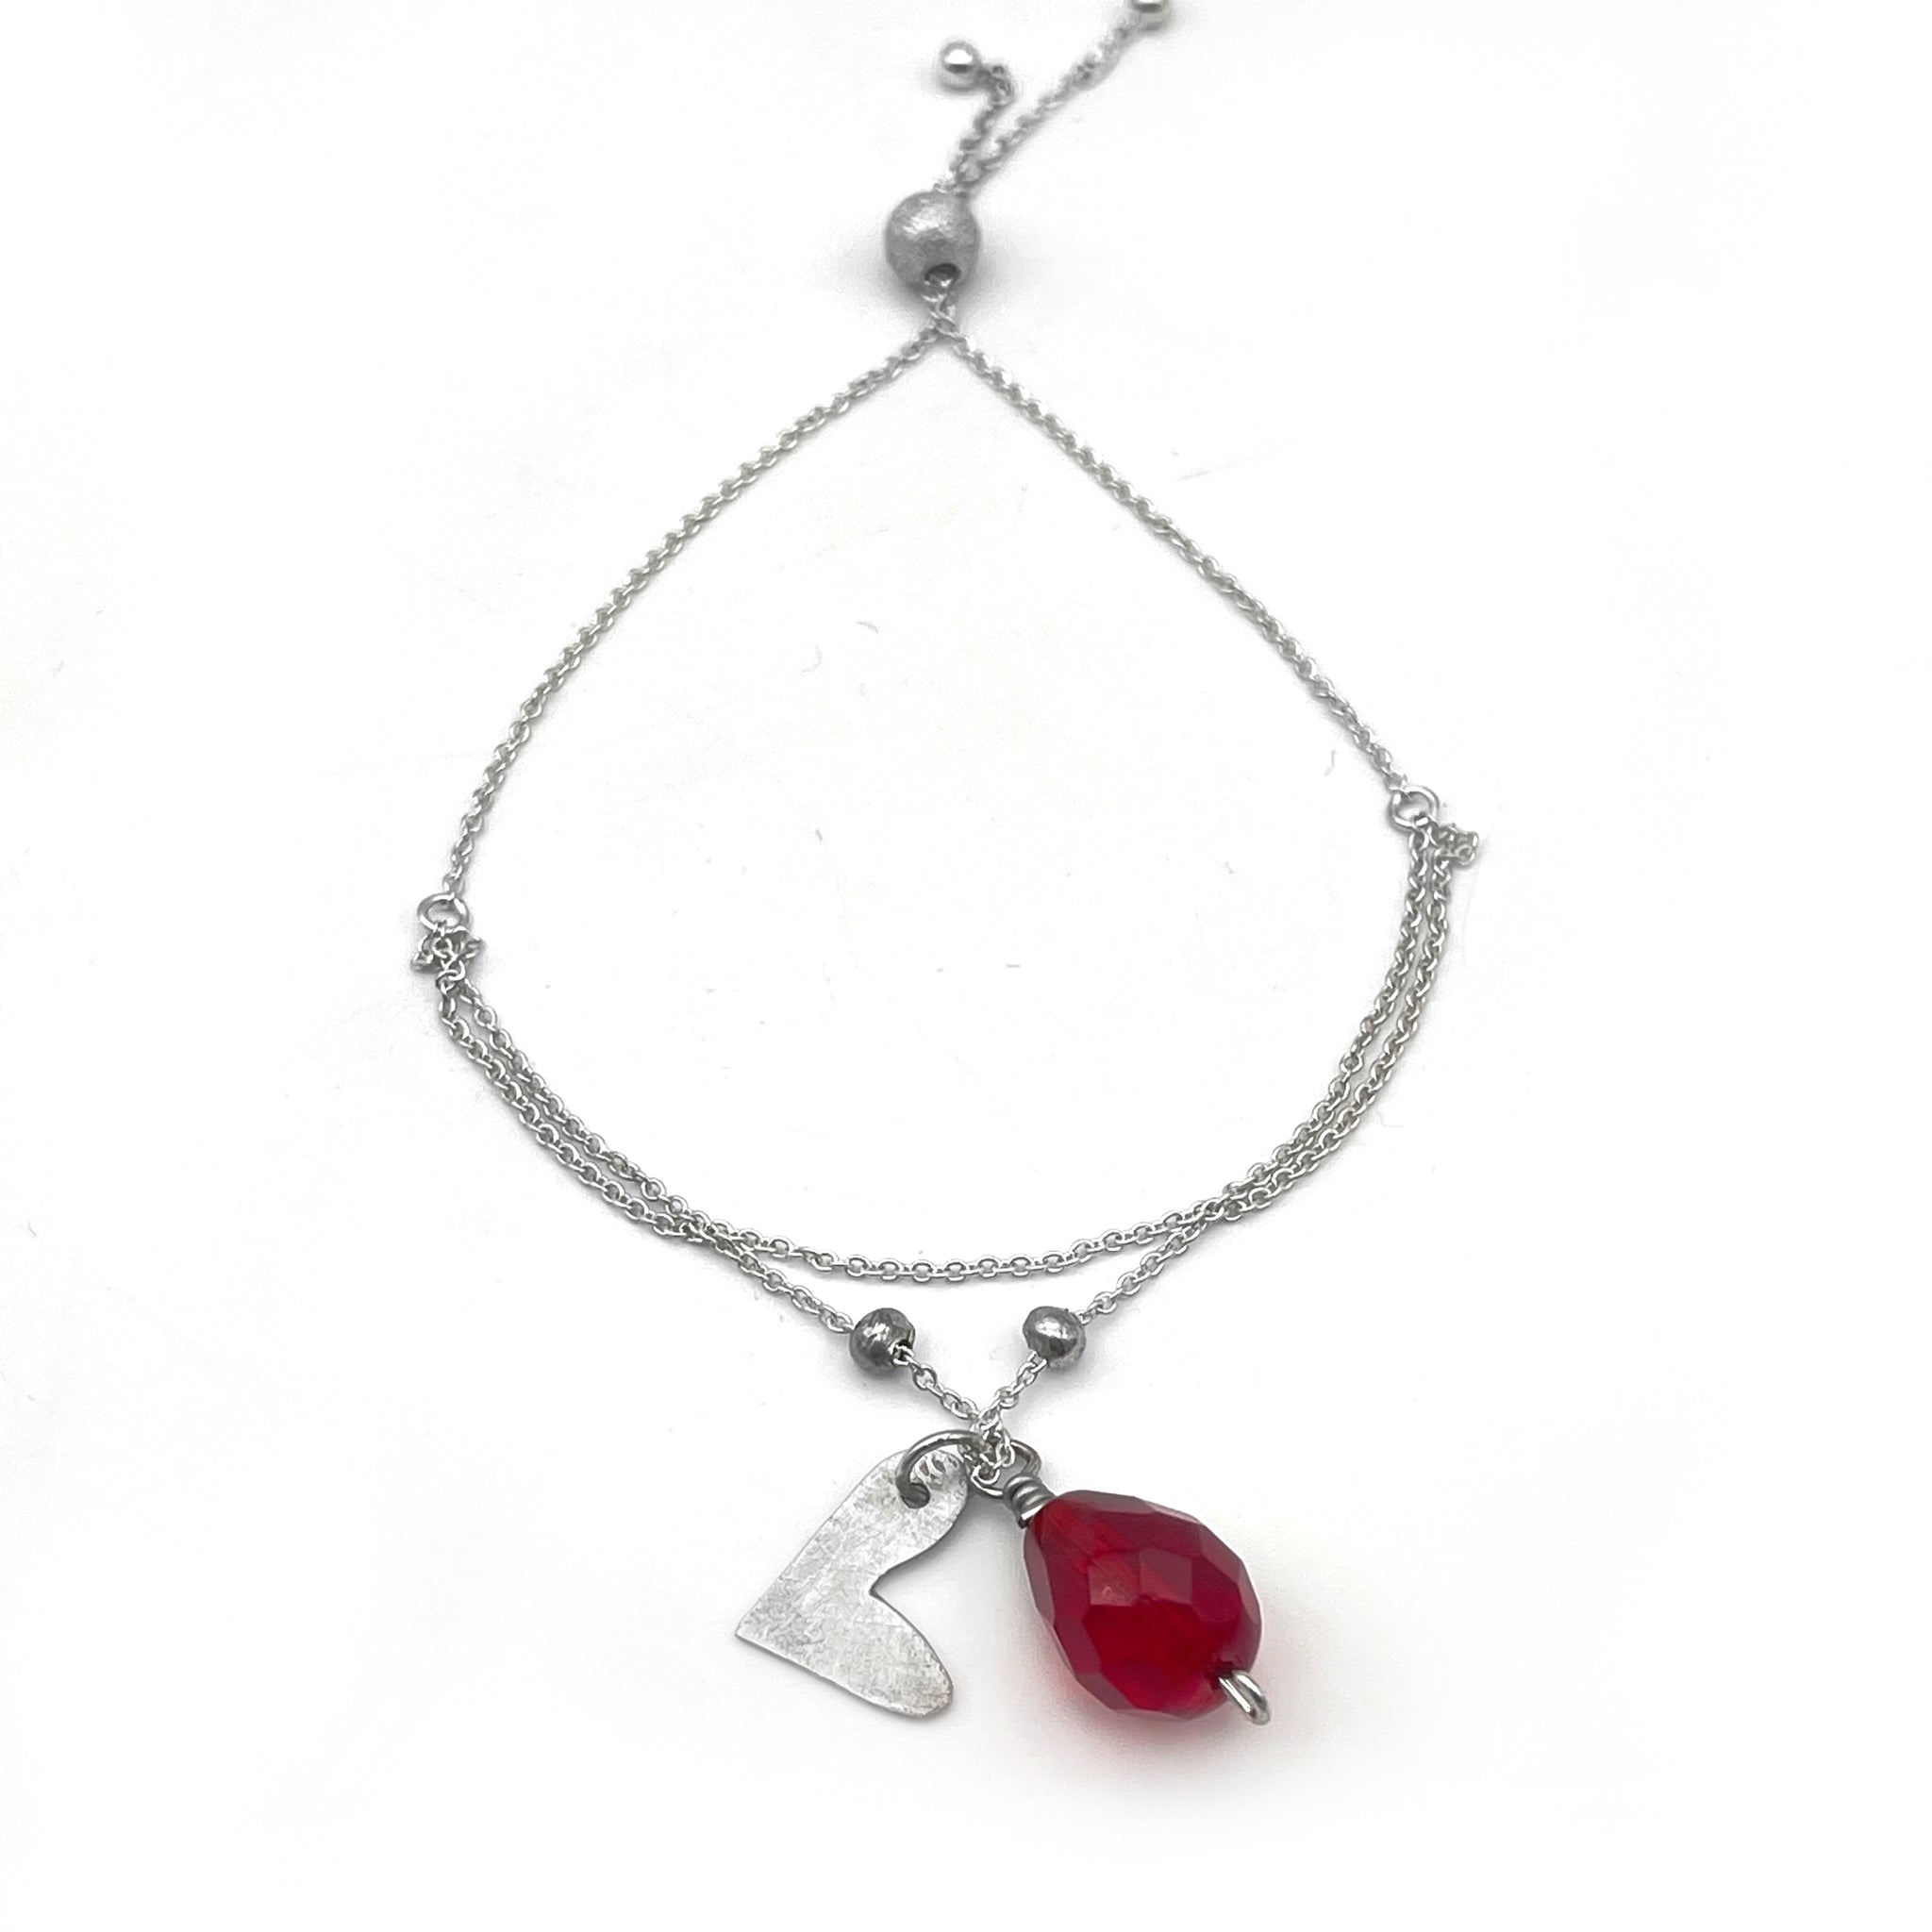 Sterling Silver Adjustable Bracelet with Whimsical Heart and Red Crystal Charm